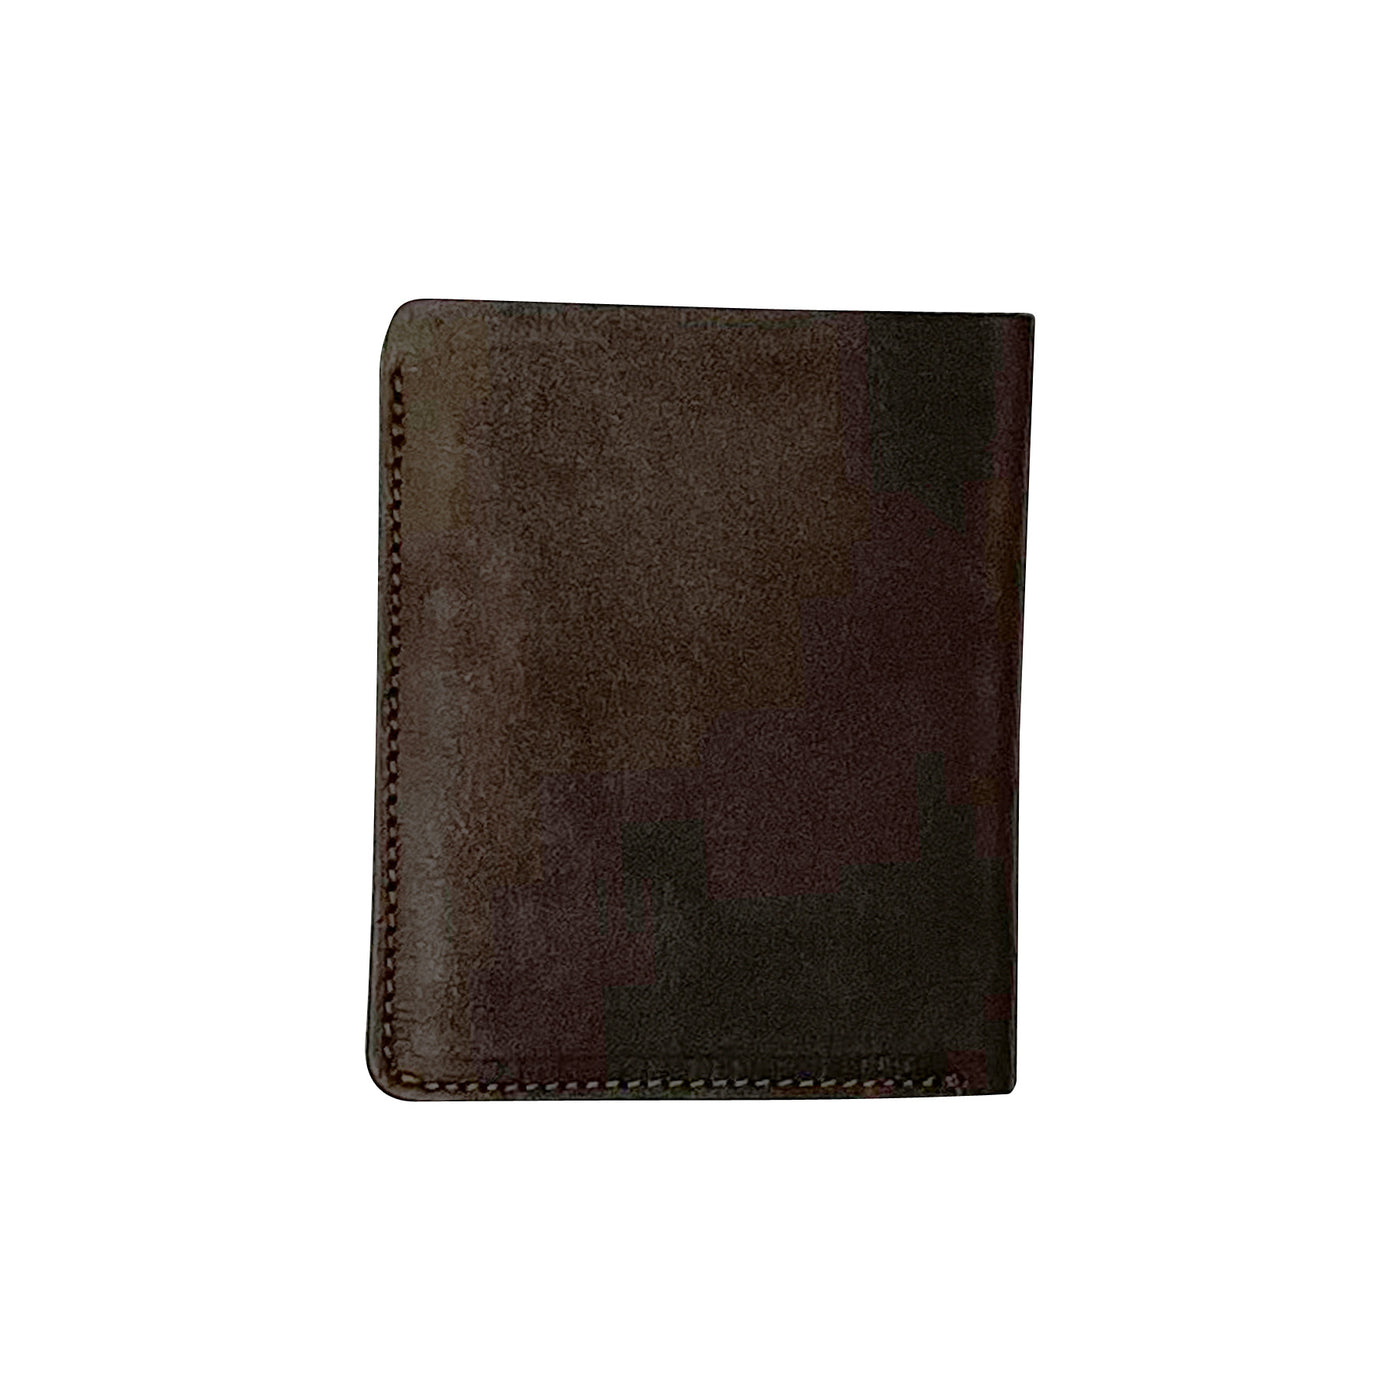 Thedi Leathers Portemonnaie Card Holder Brown